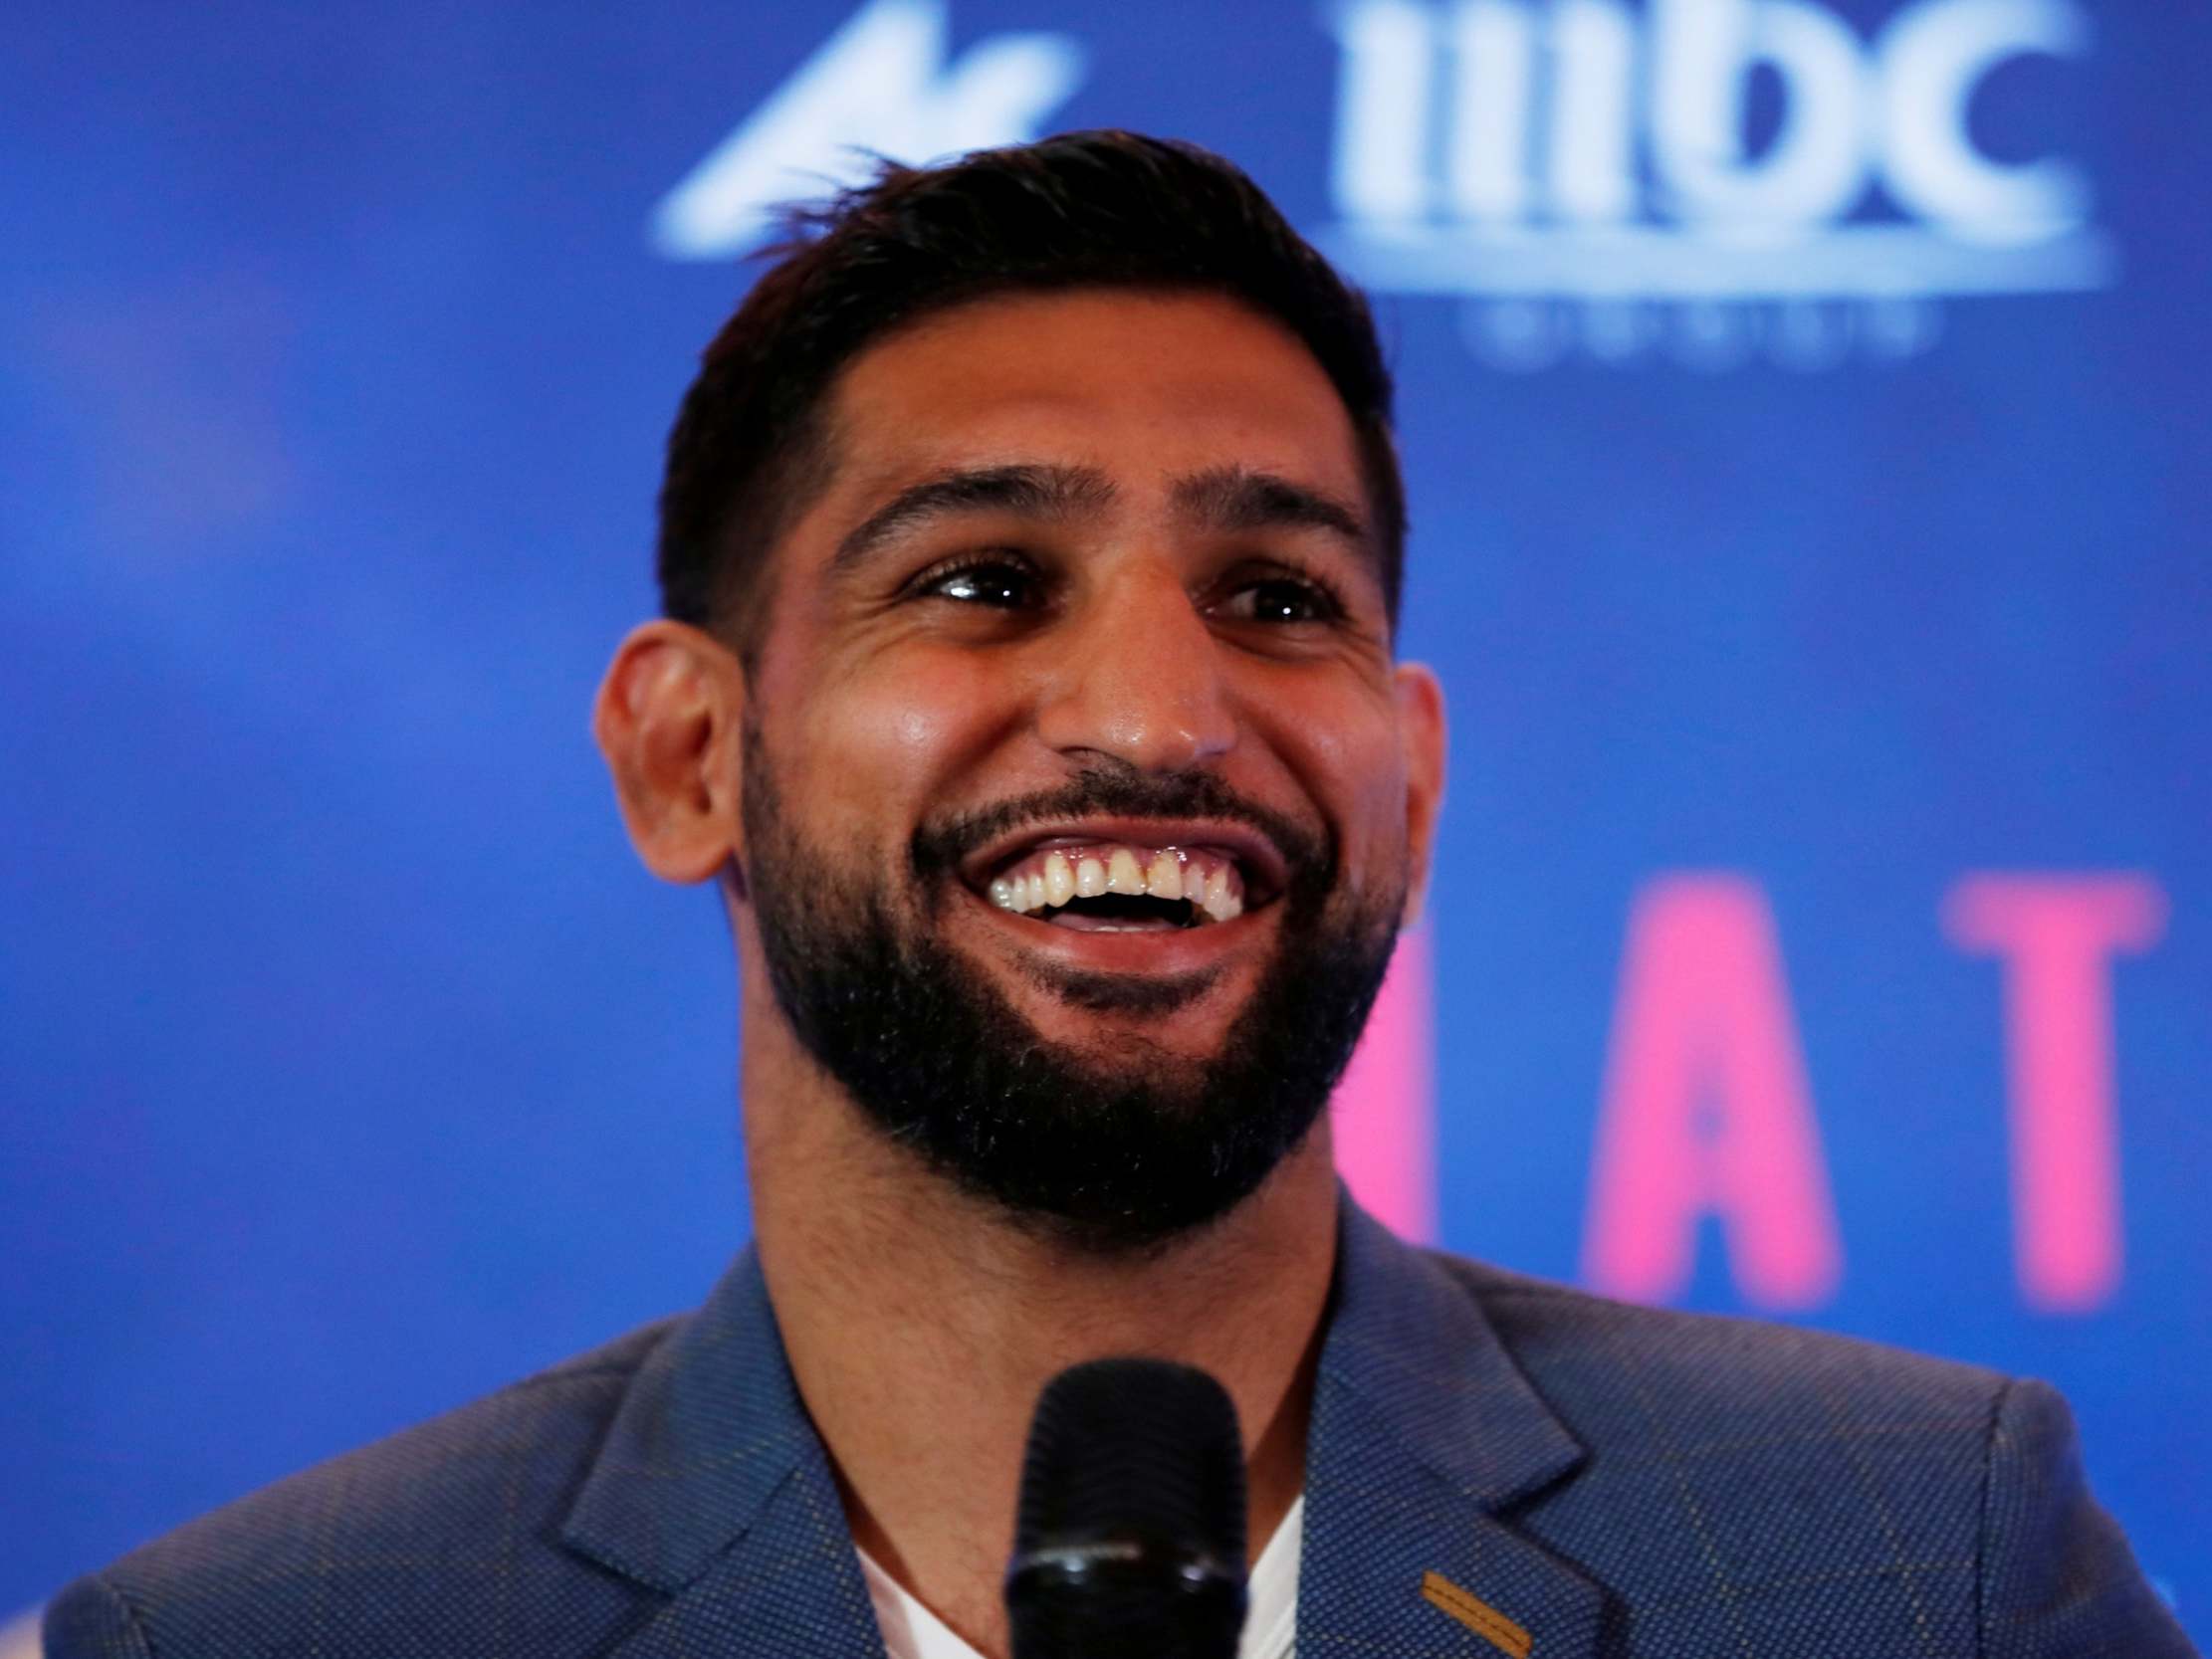 Khan is currently in Saudi Arabia to promote the fight that has now been cancelled